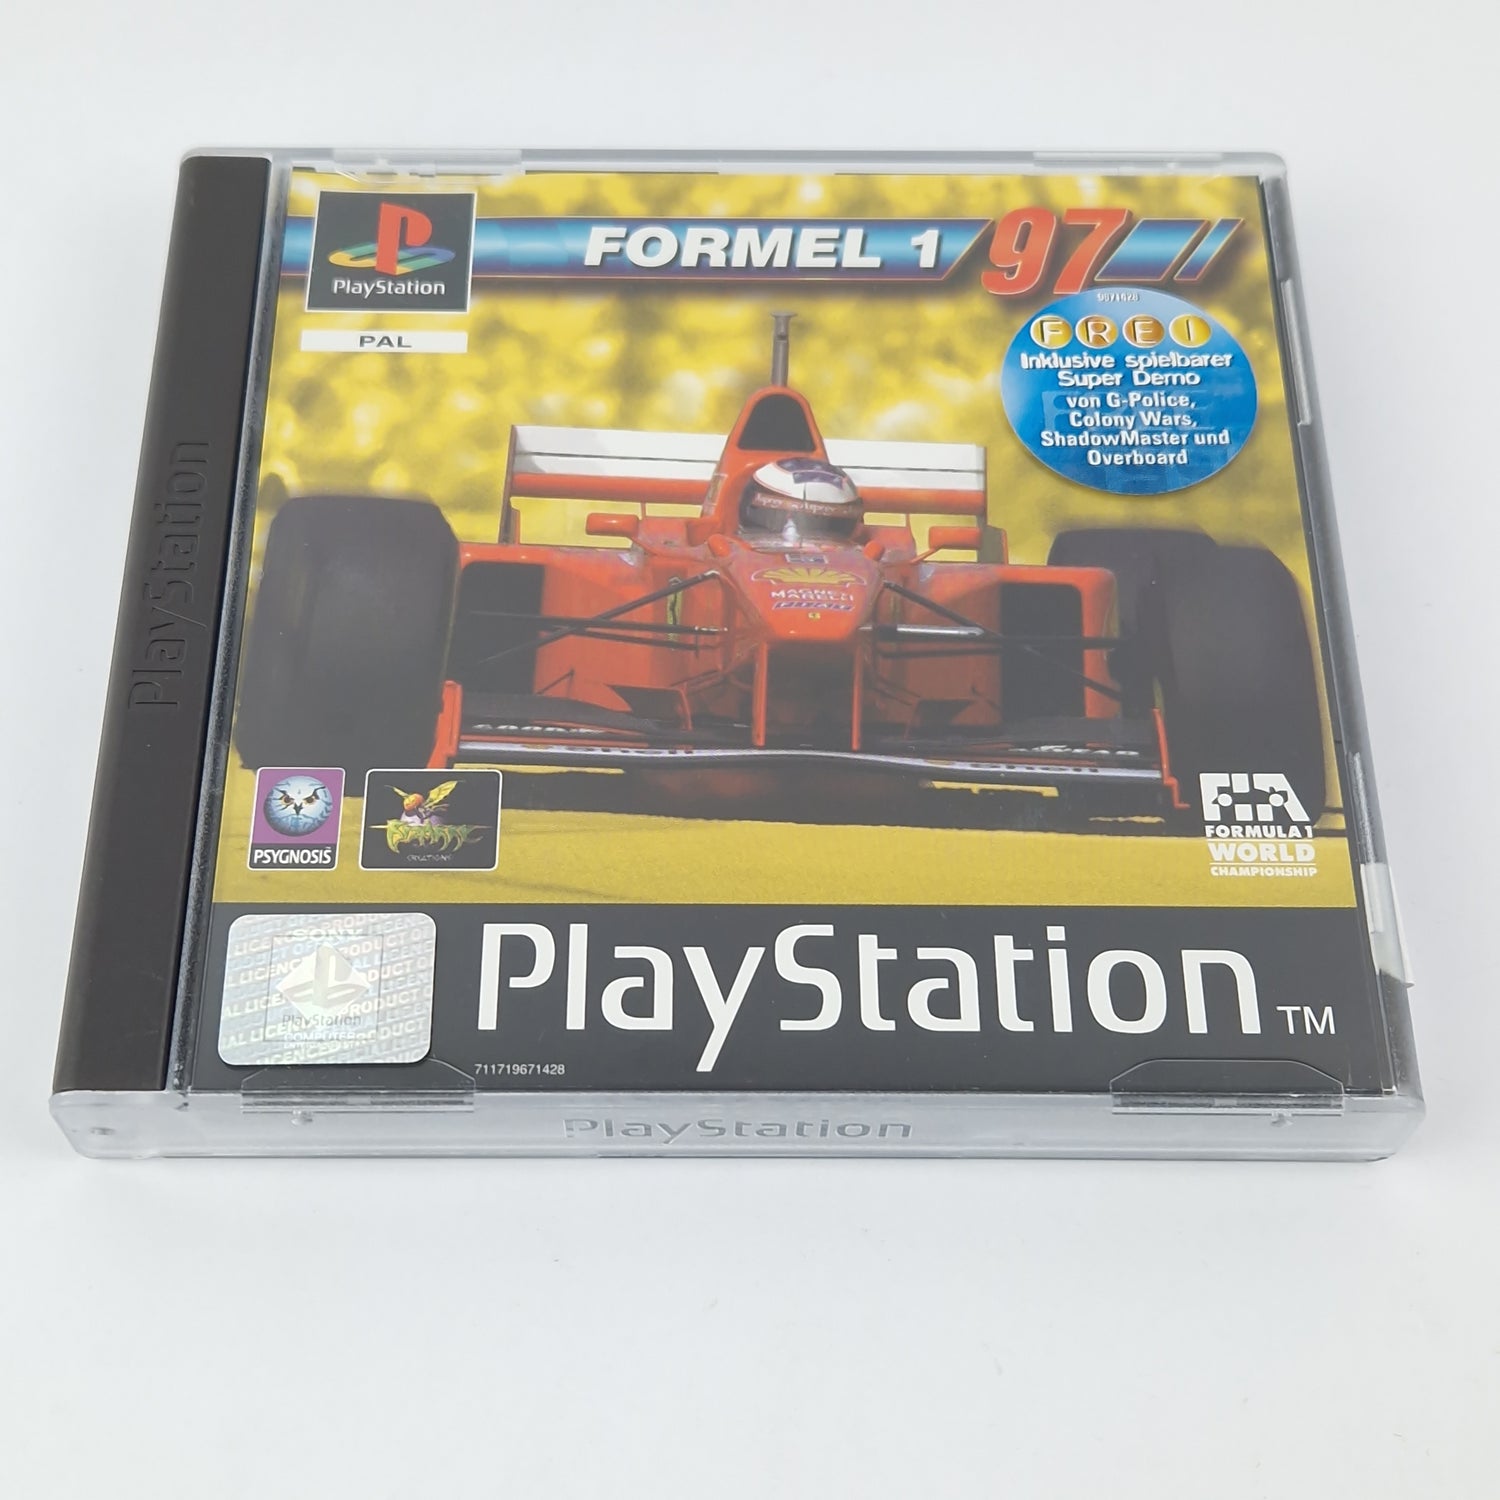 Playstation 1 Spiel : Forme 1 97 + DEMO - CD Anleitung OVP | SONY PS1 PSX